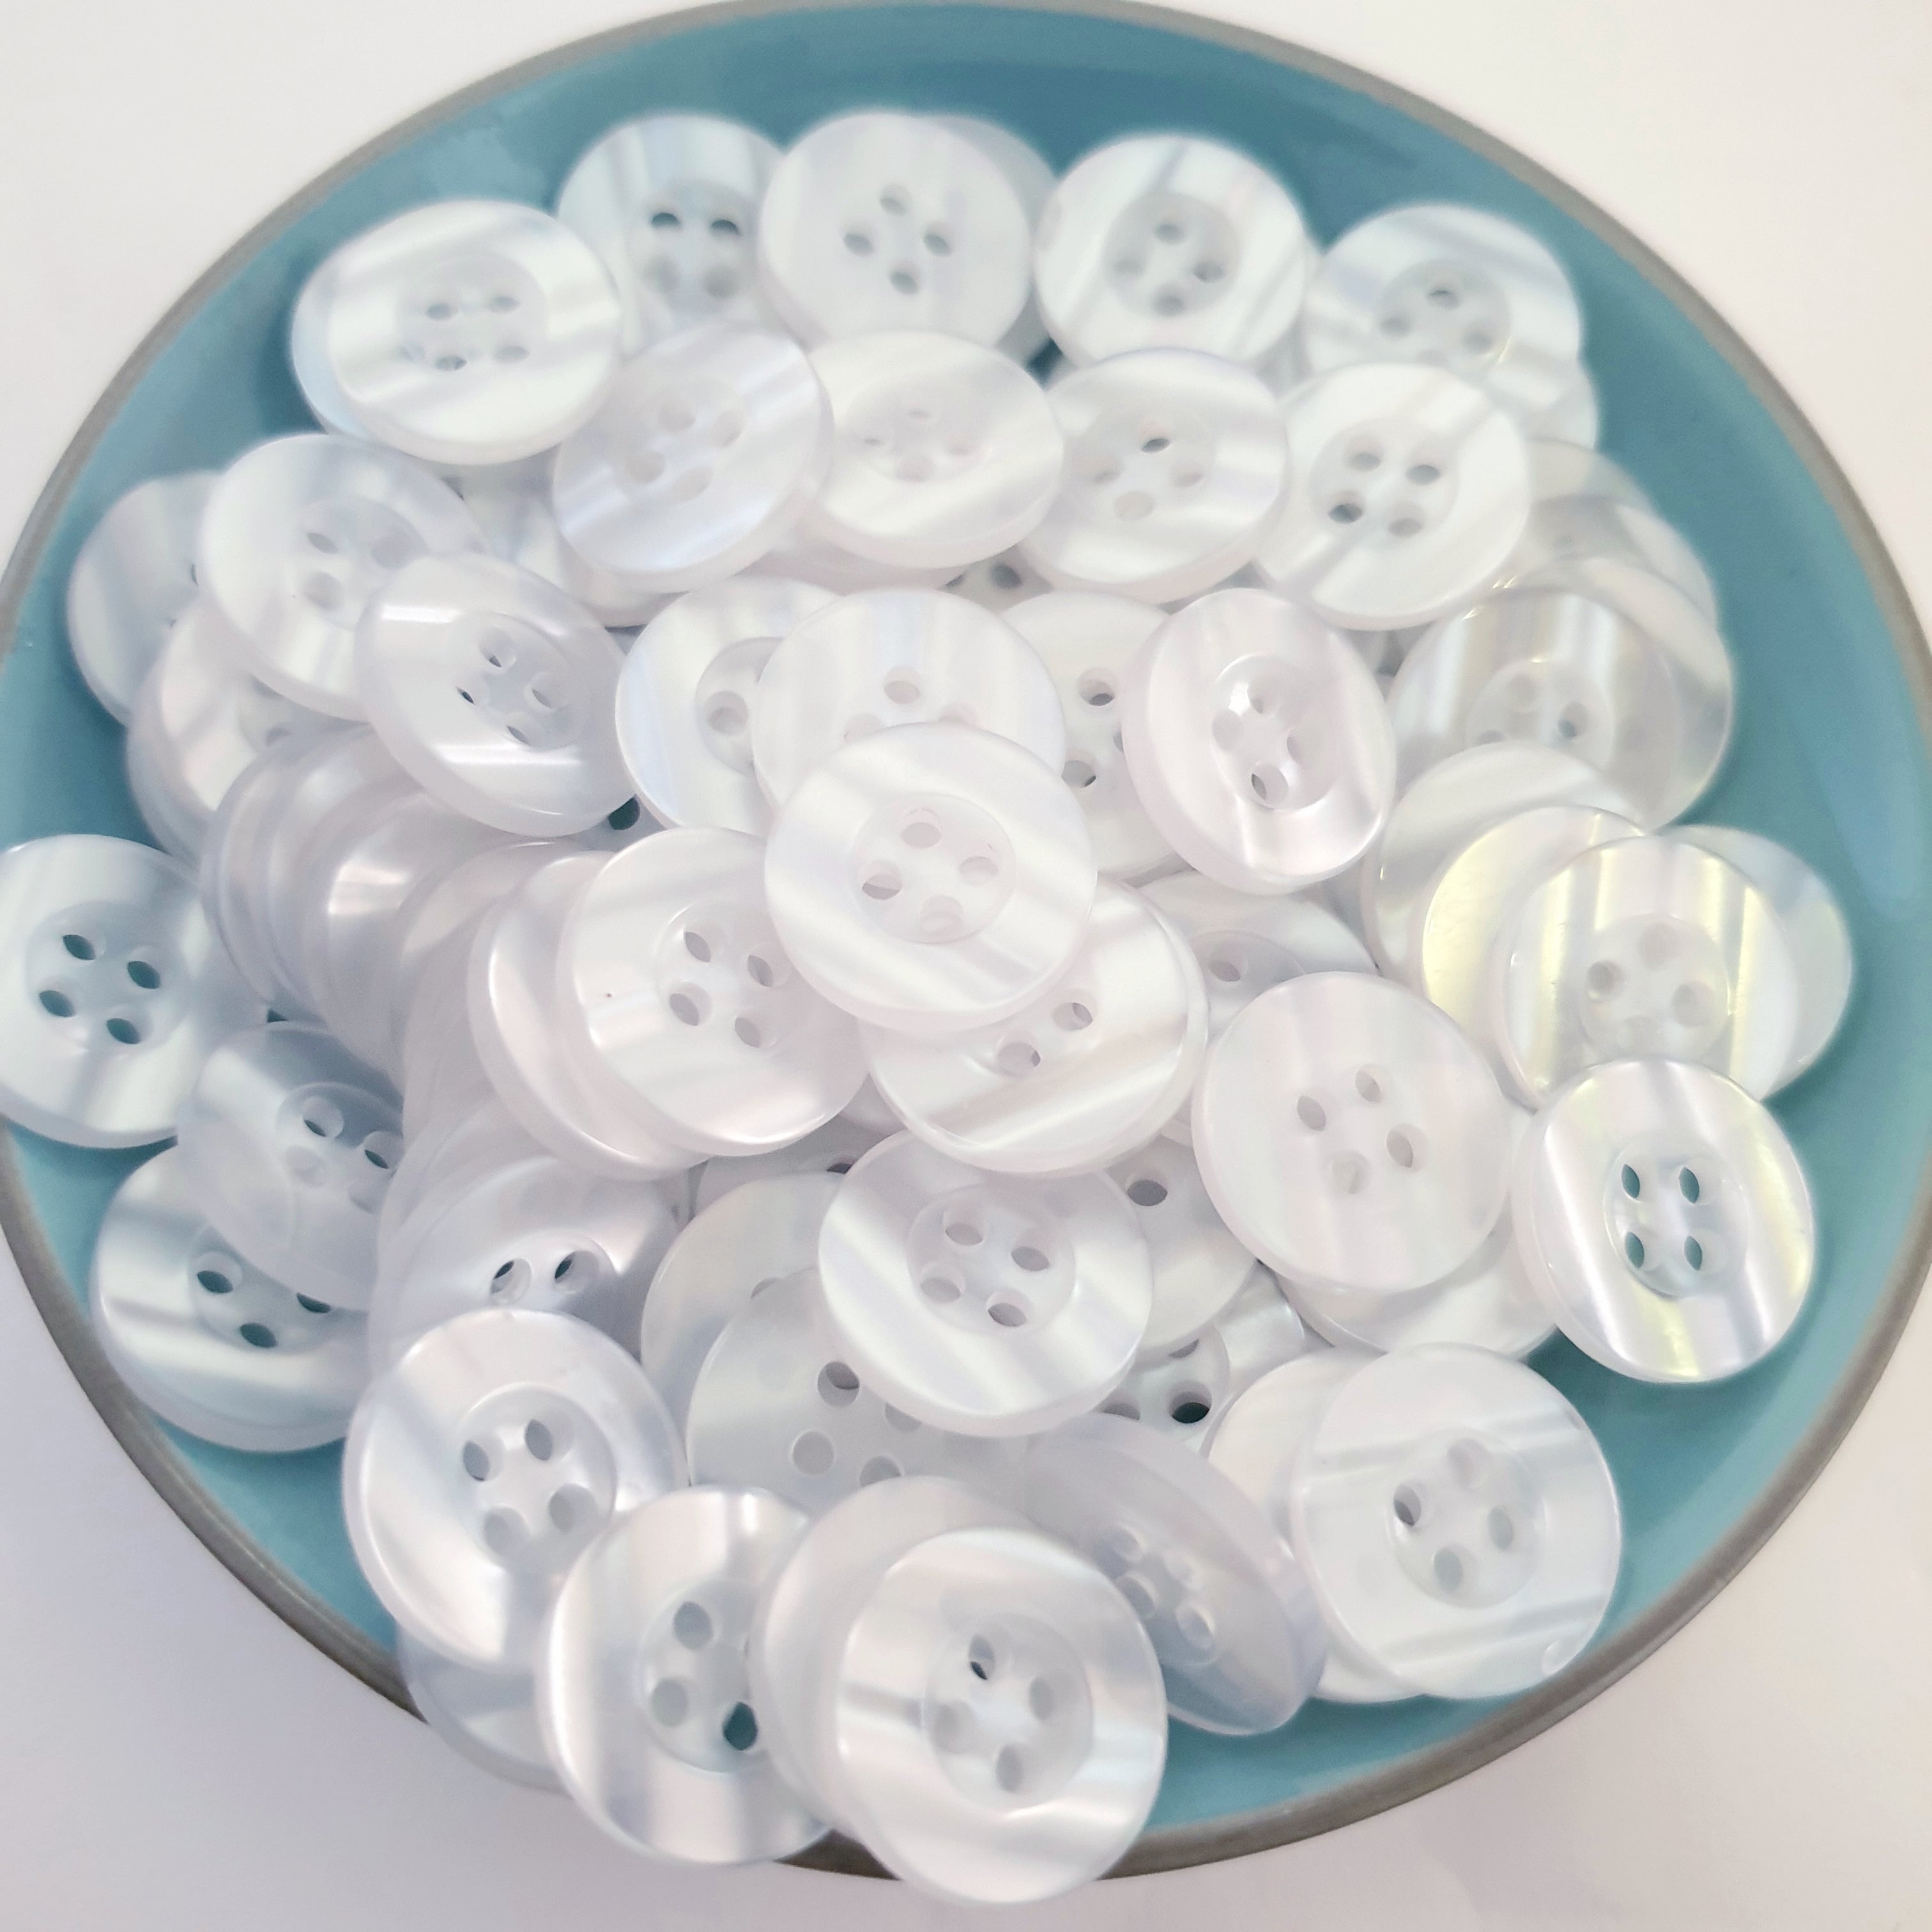 MajorCrafts 50pcs 15mm Clear White Pearlescent 4 Holes Round Resin Sewing Buttons